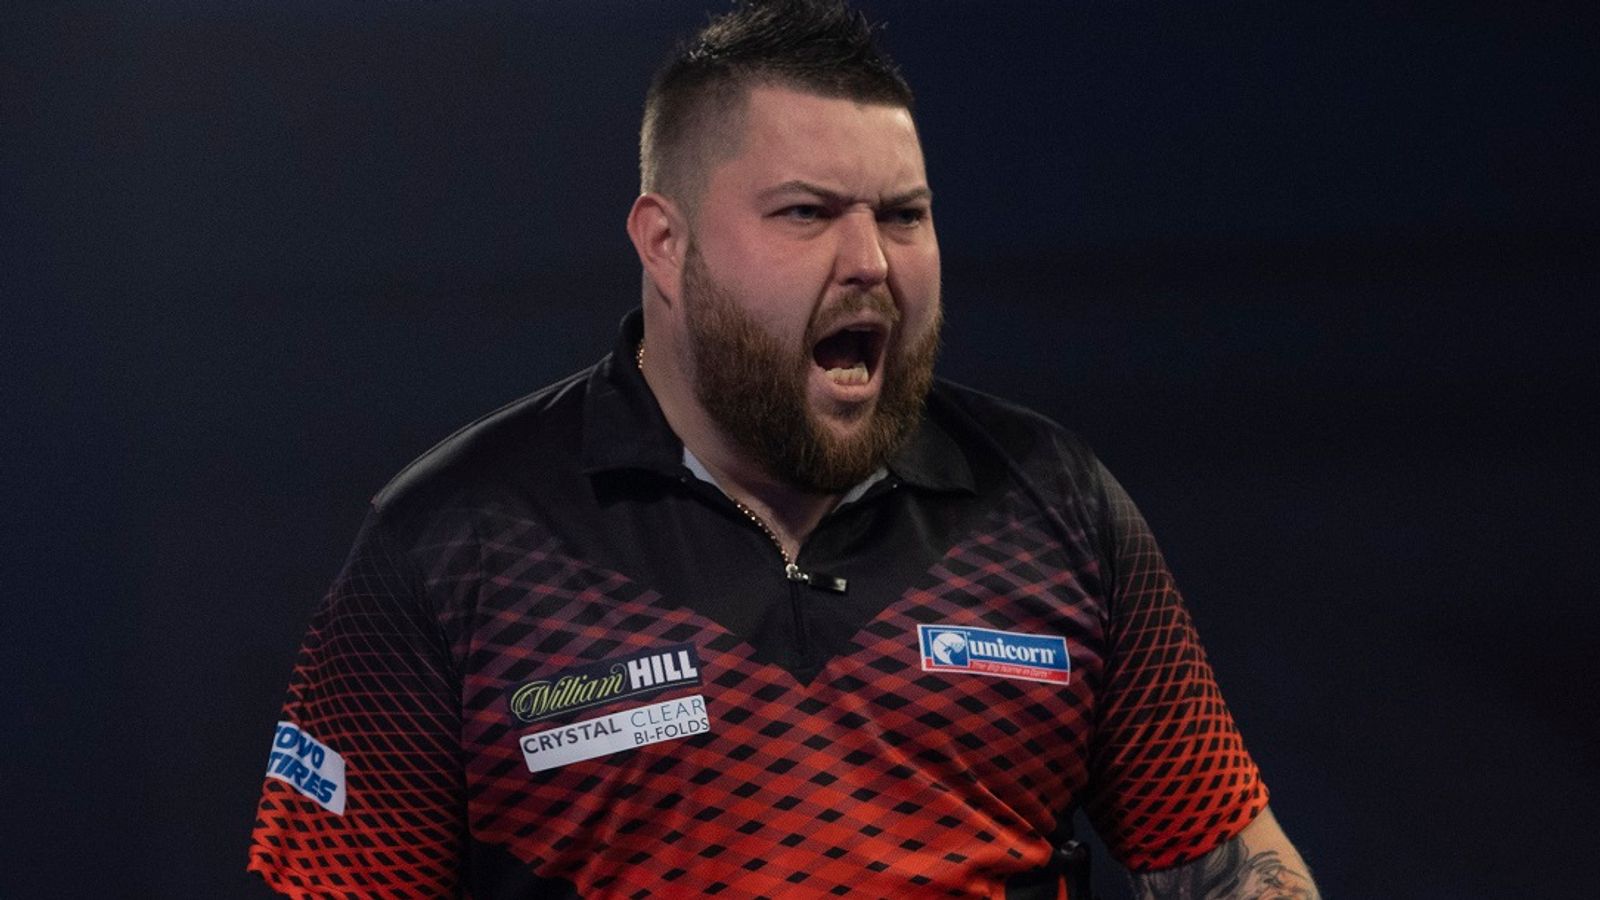 Michael Smith wins his first title of 2021 at Players Championship 10 ...